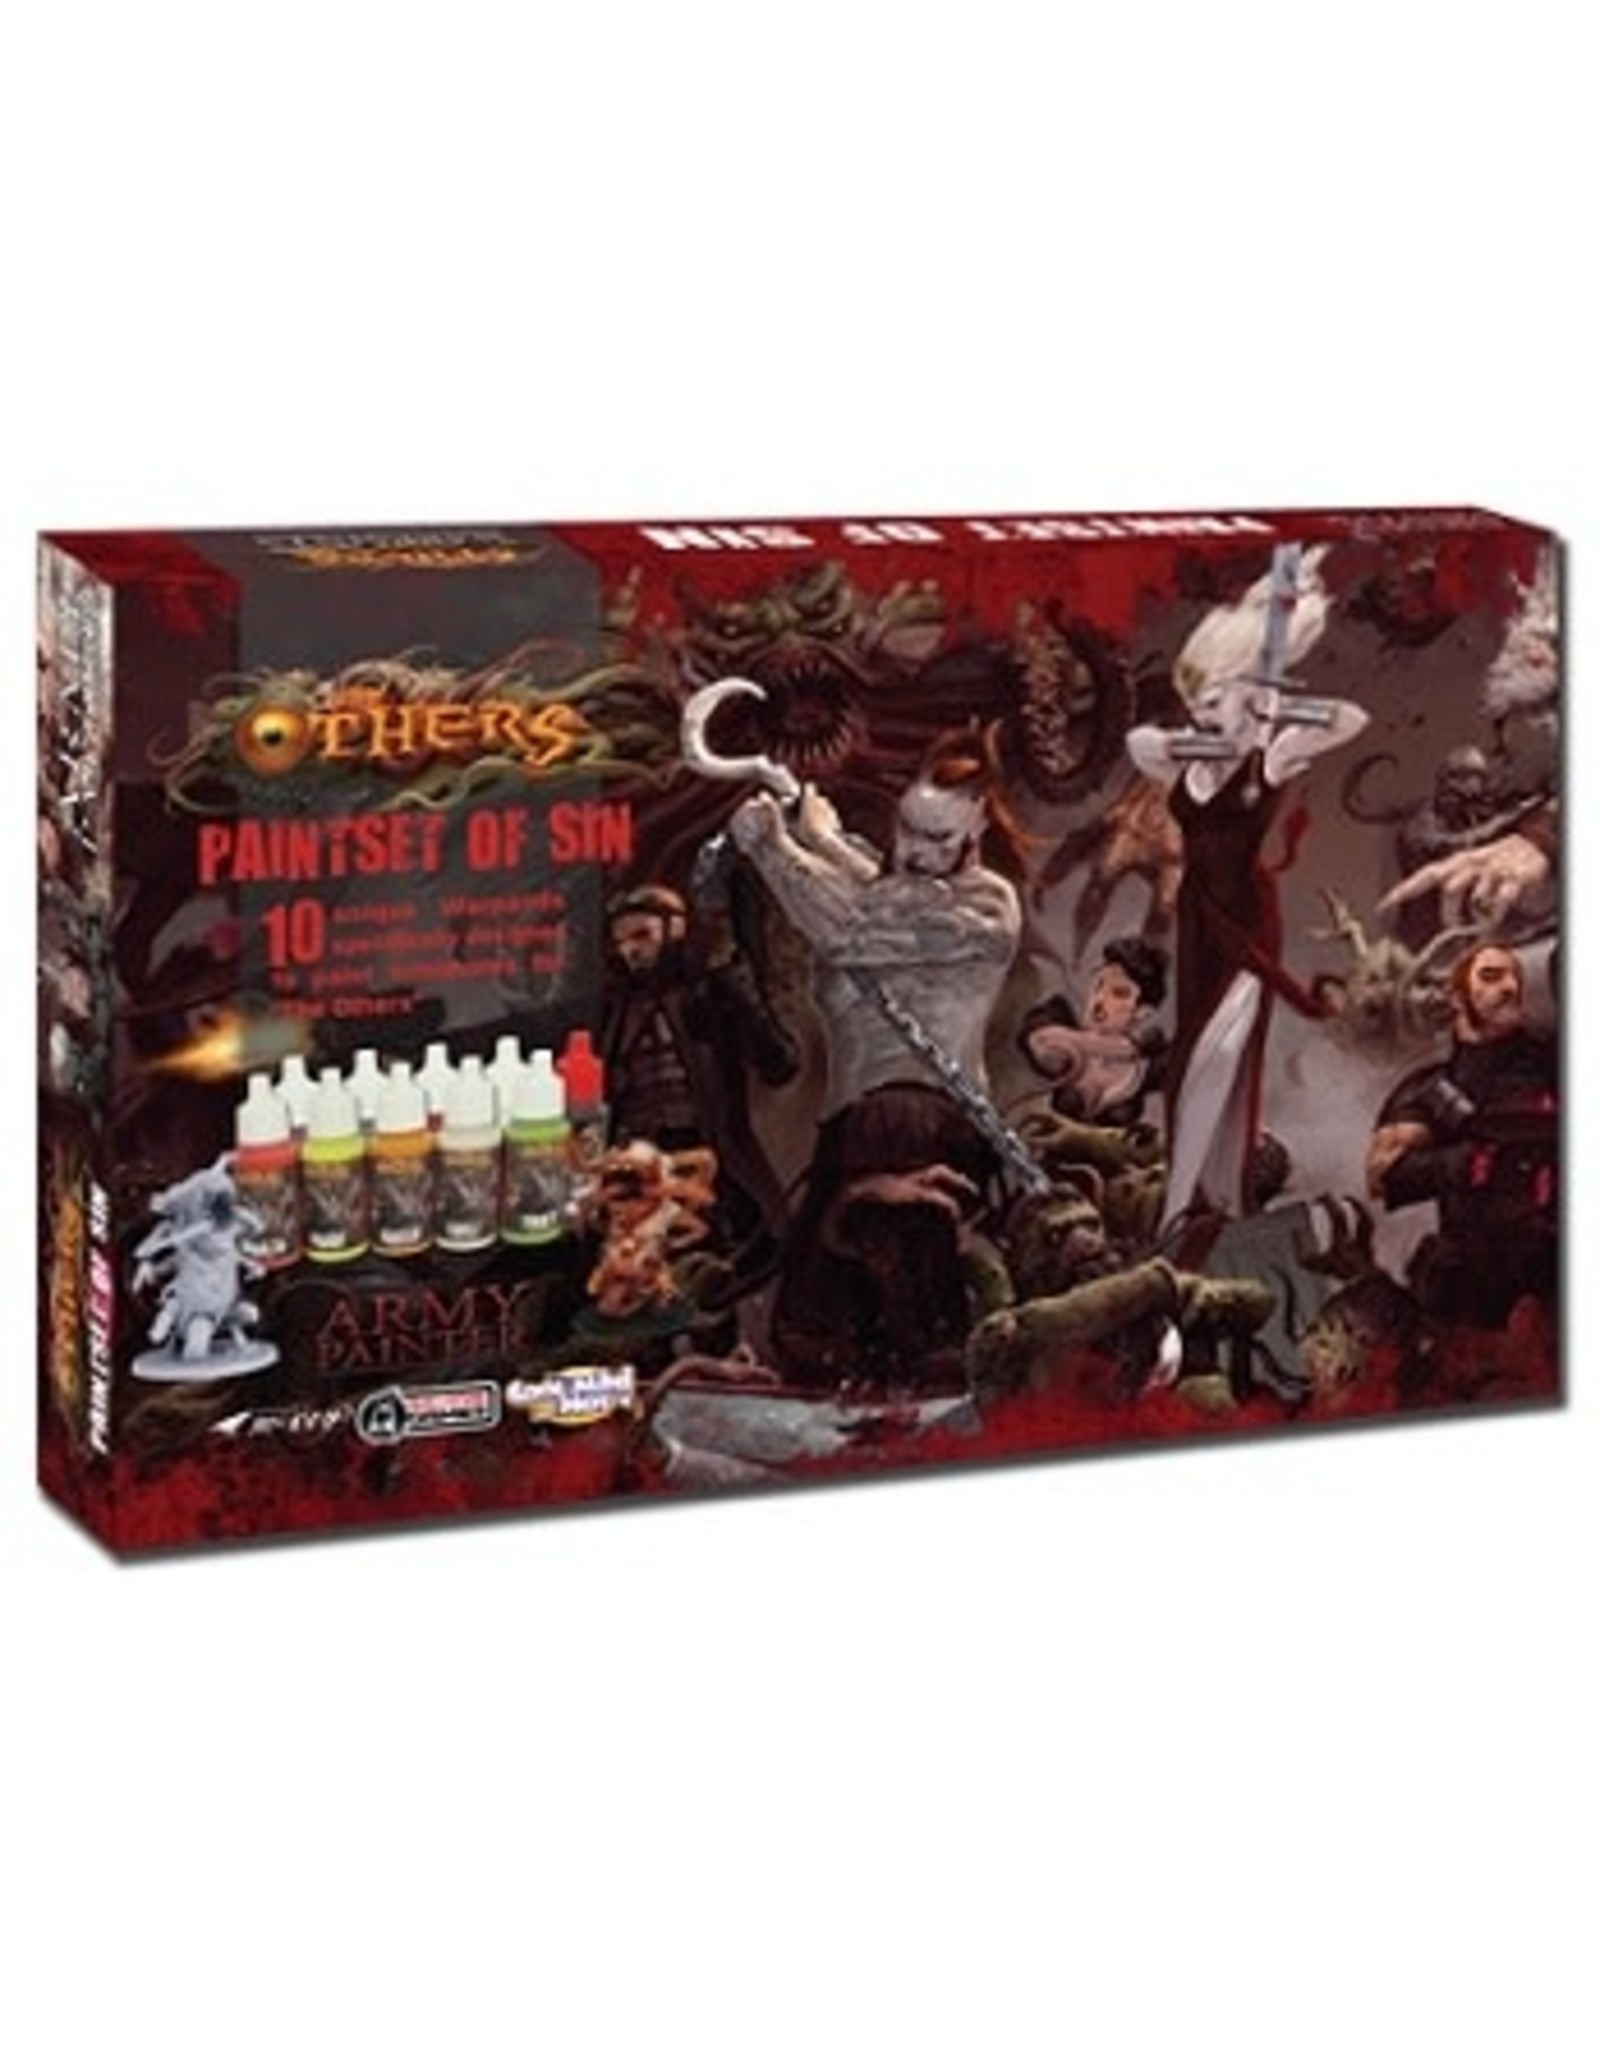 Army Painter The Others Paintset of Sin